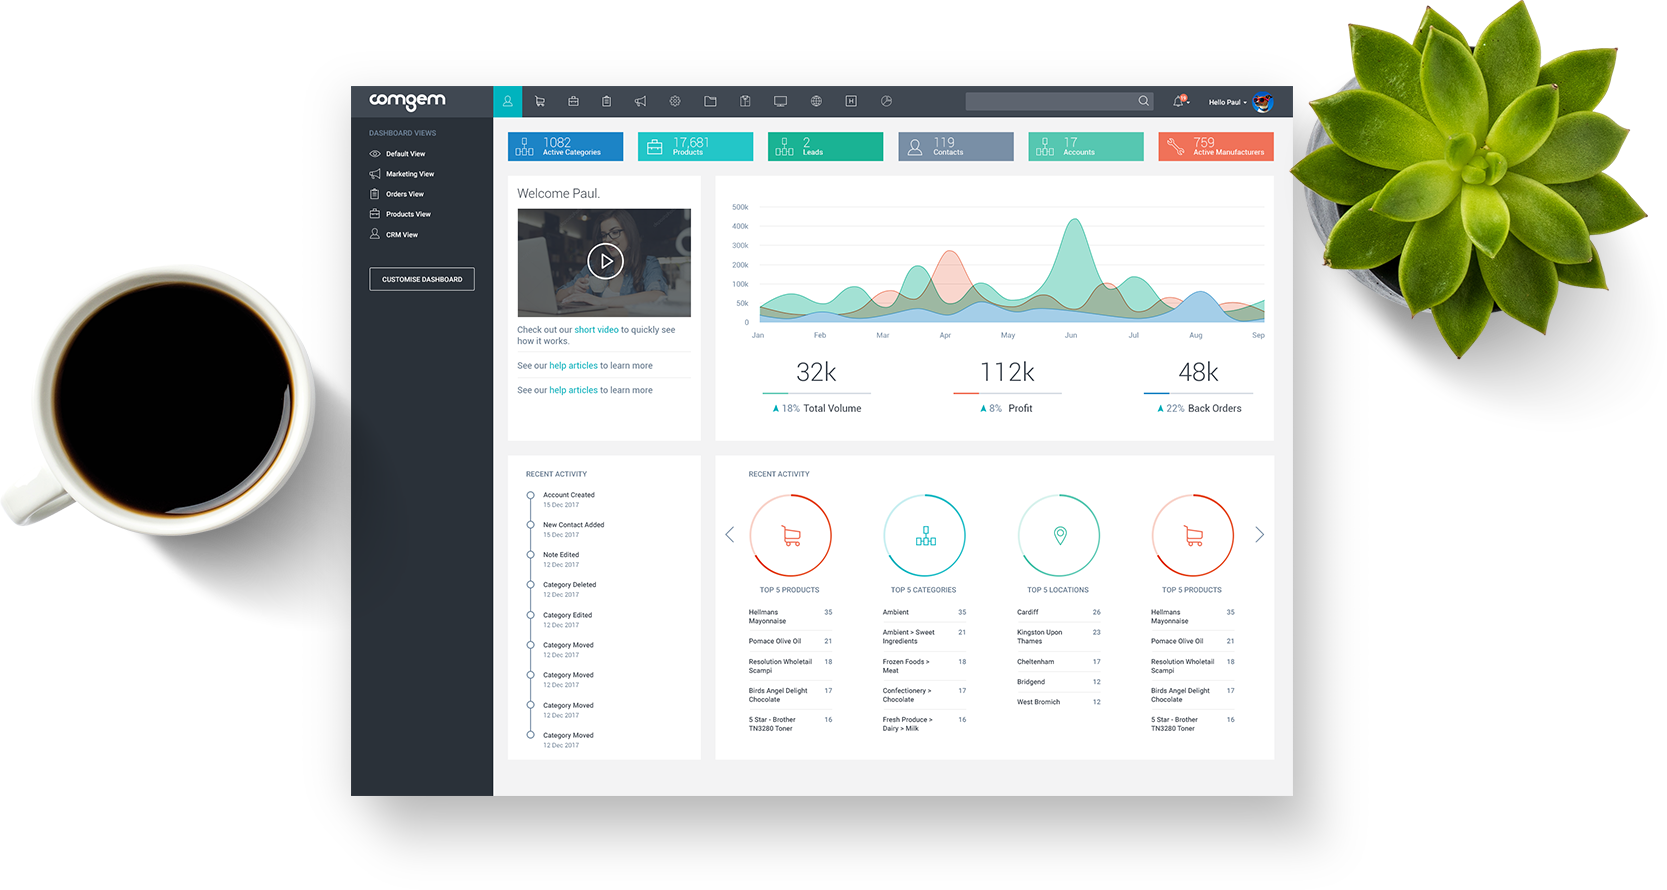 Back office system dashboard